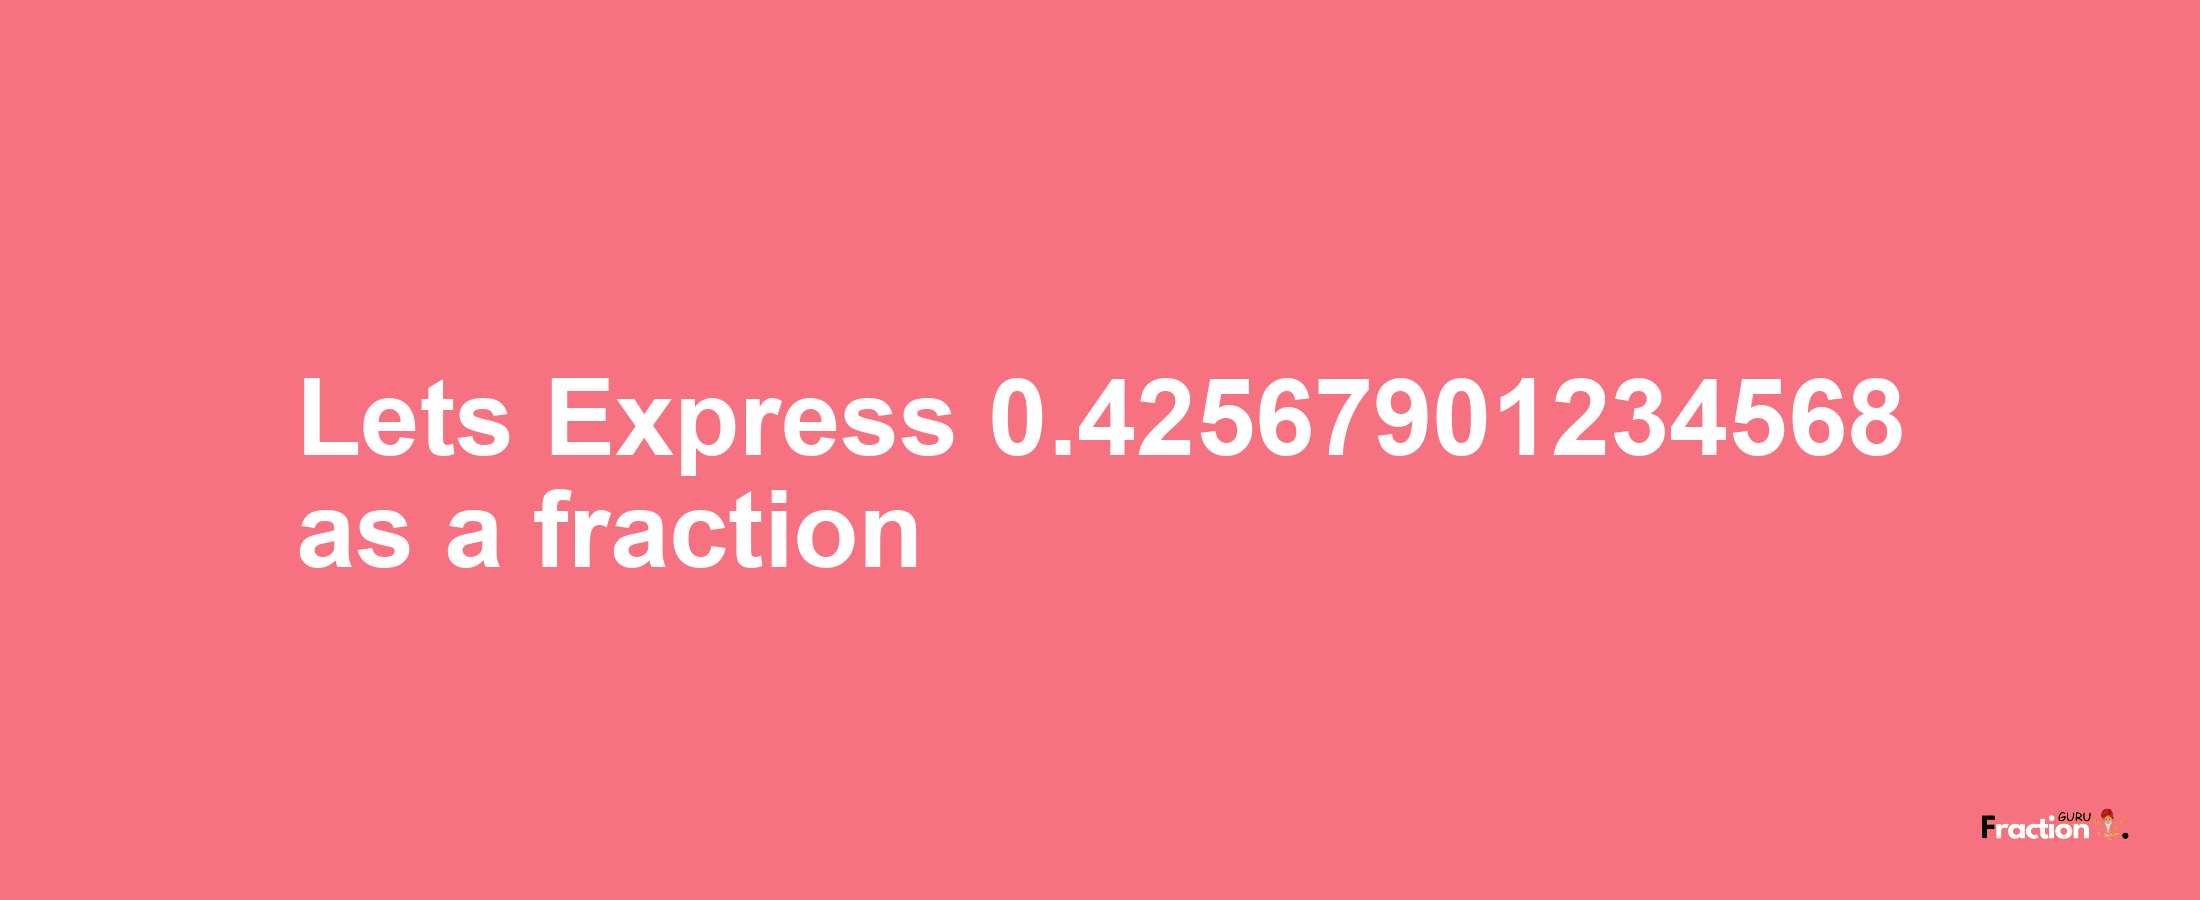 Lets Express 0.42567901234568 as afraction